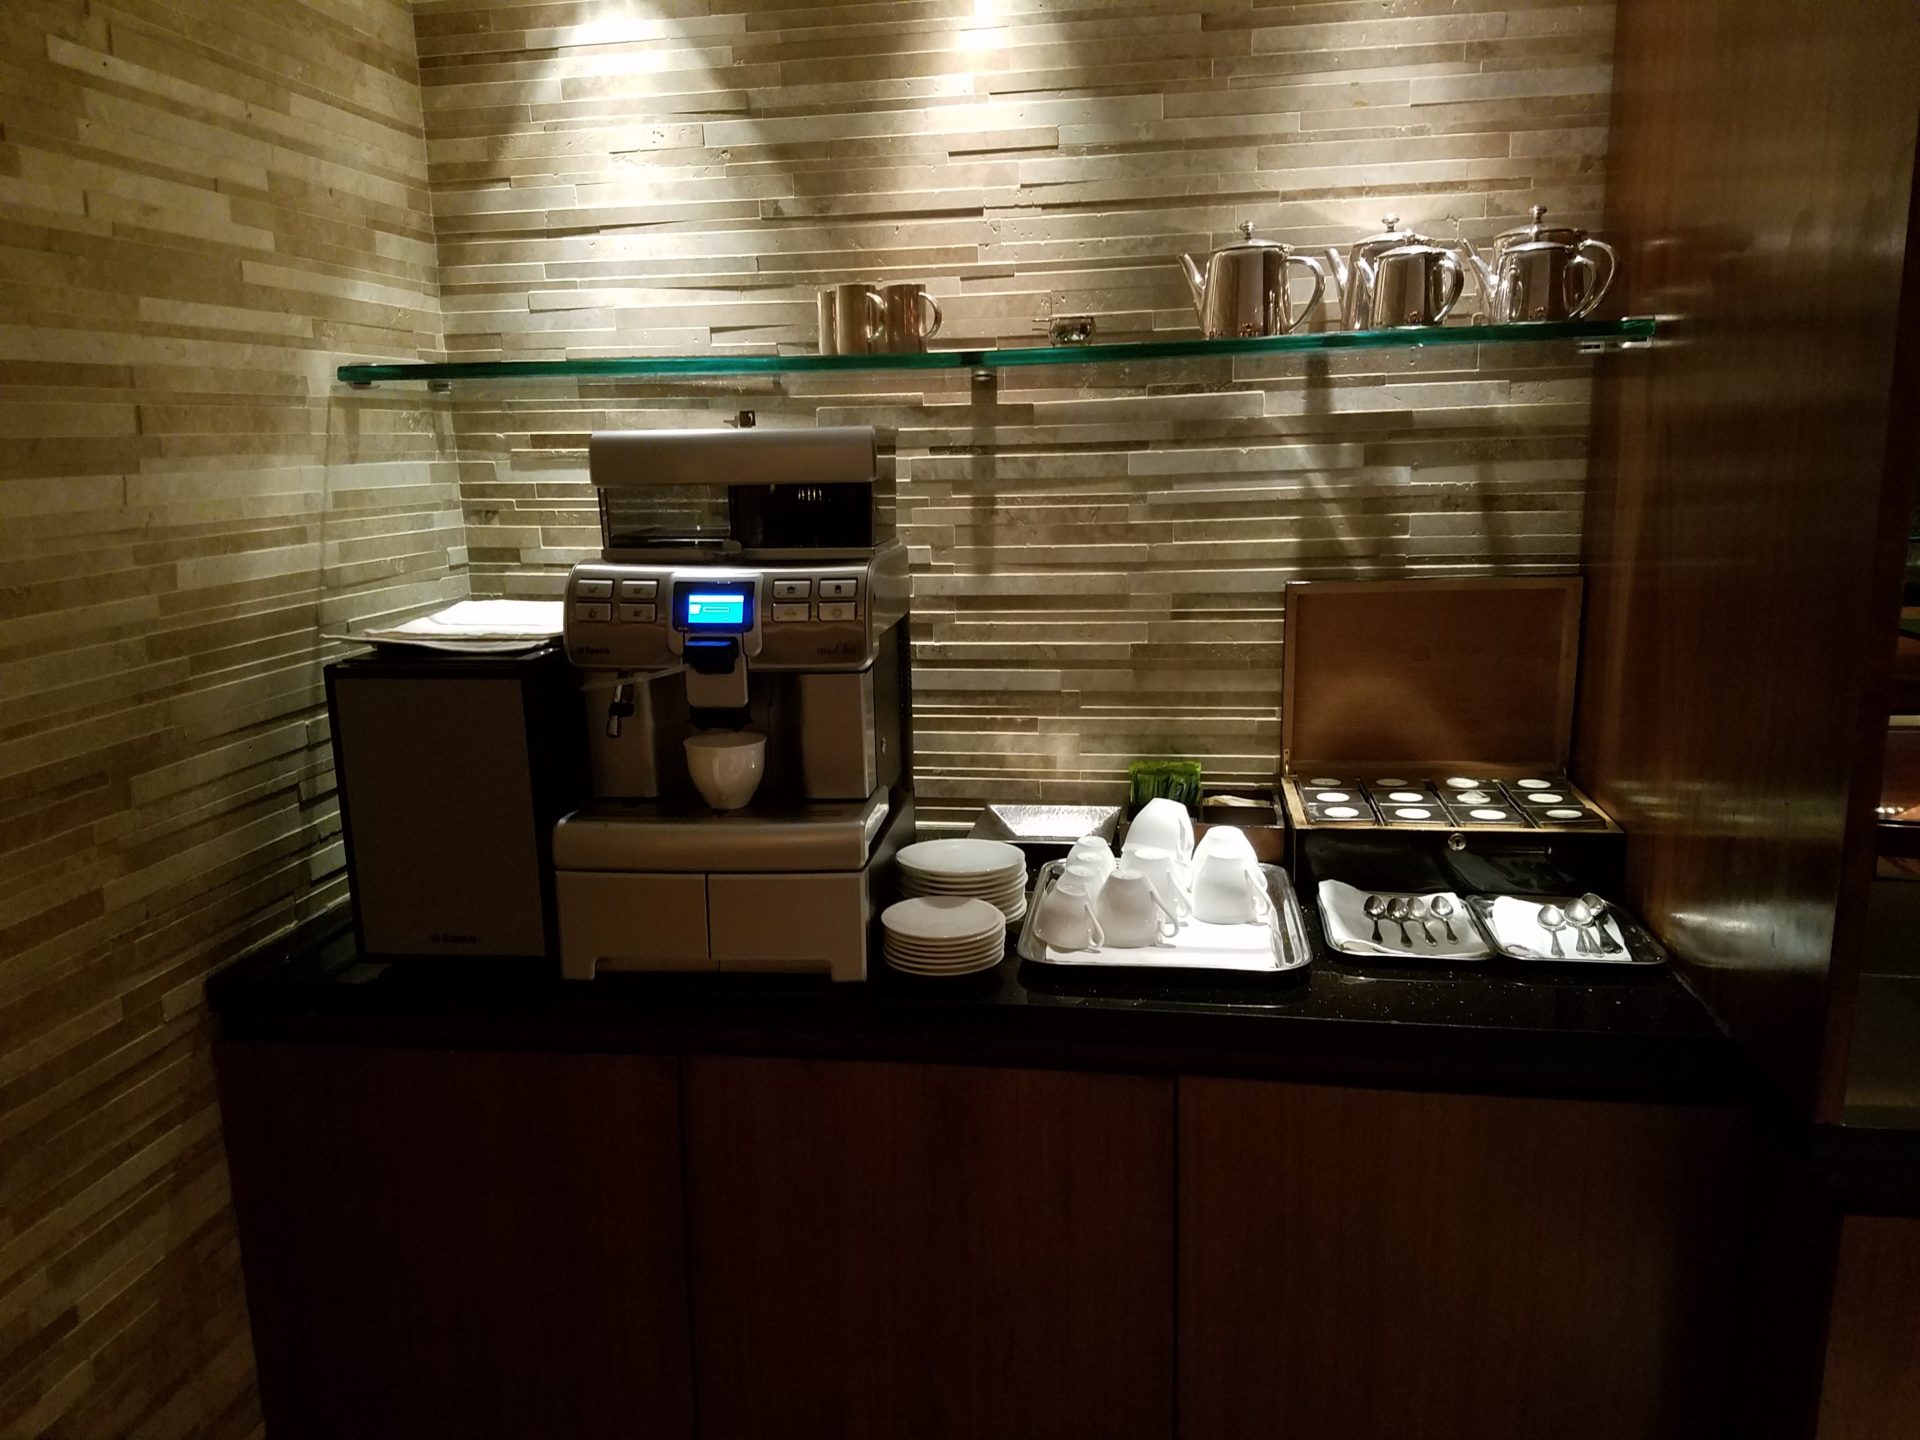 a coffee machine and utensils on a counter